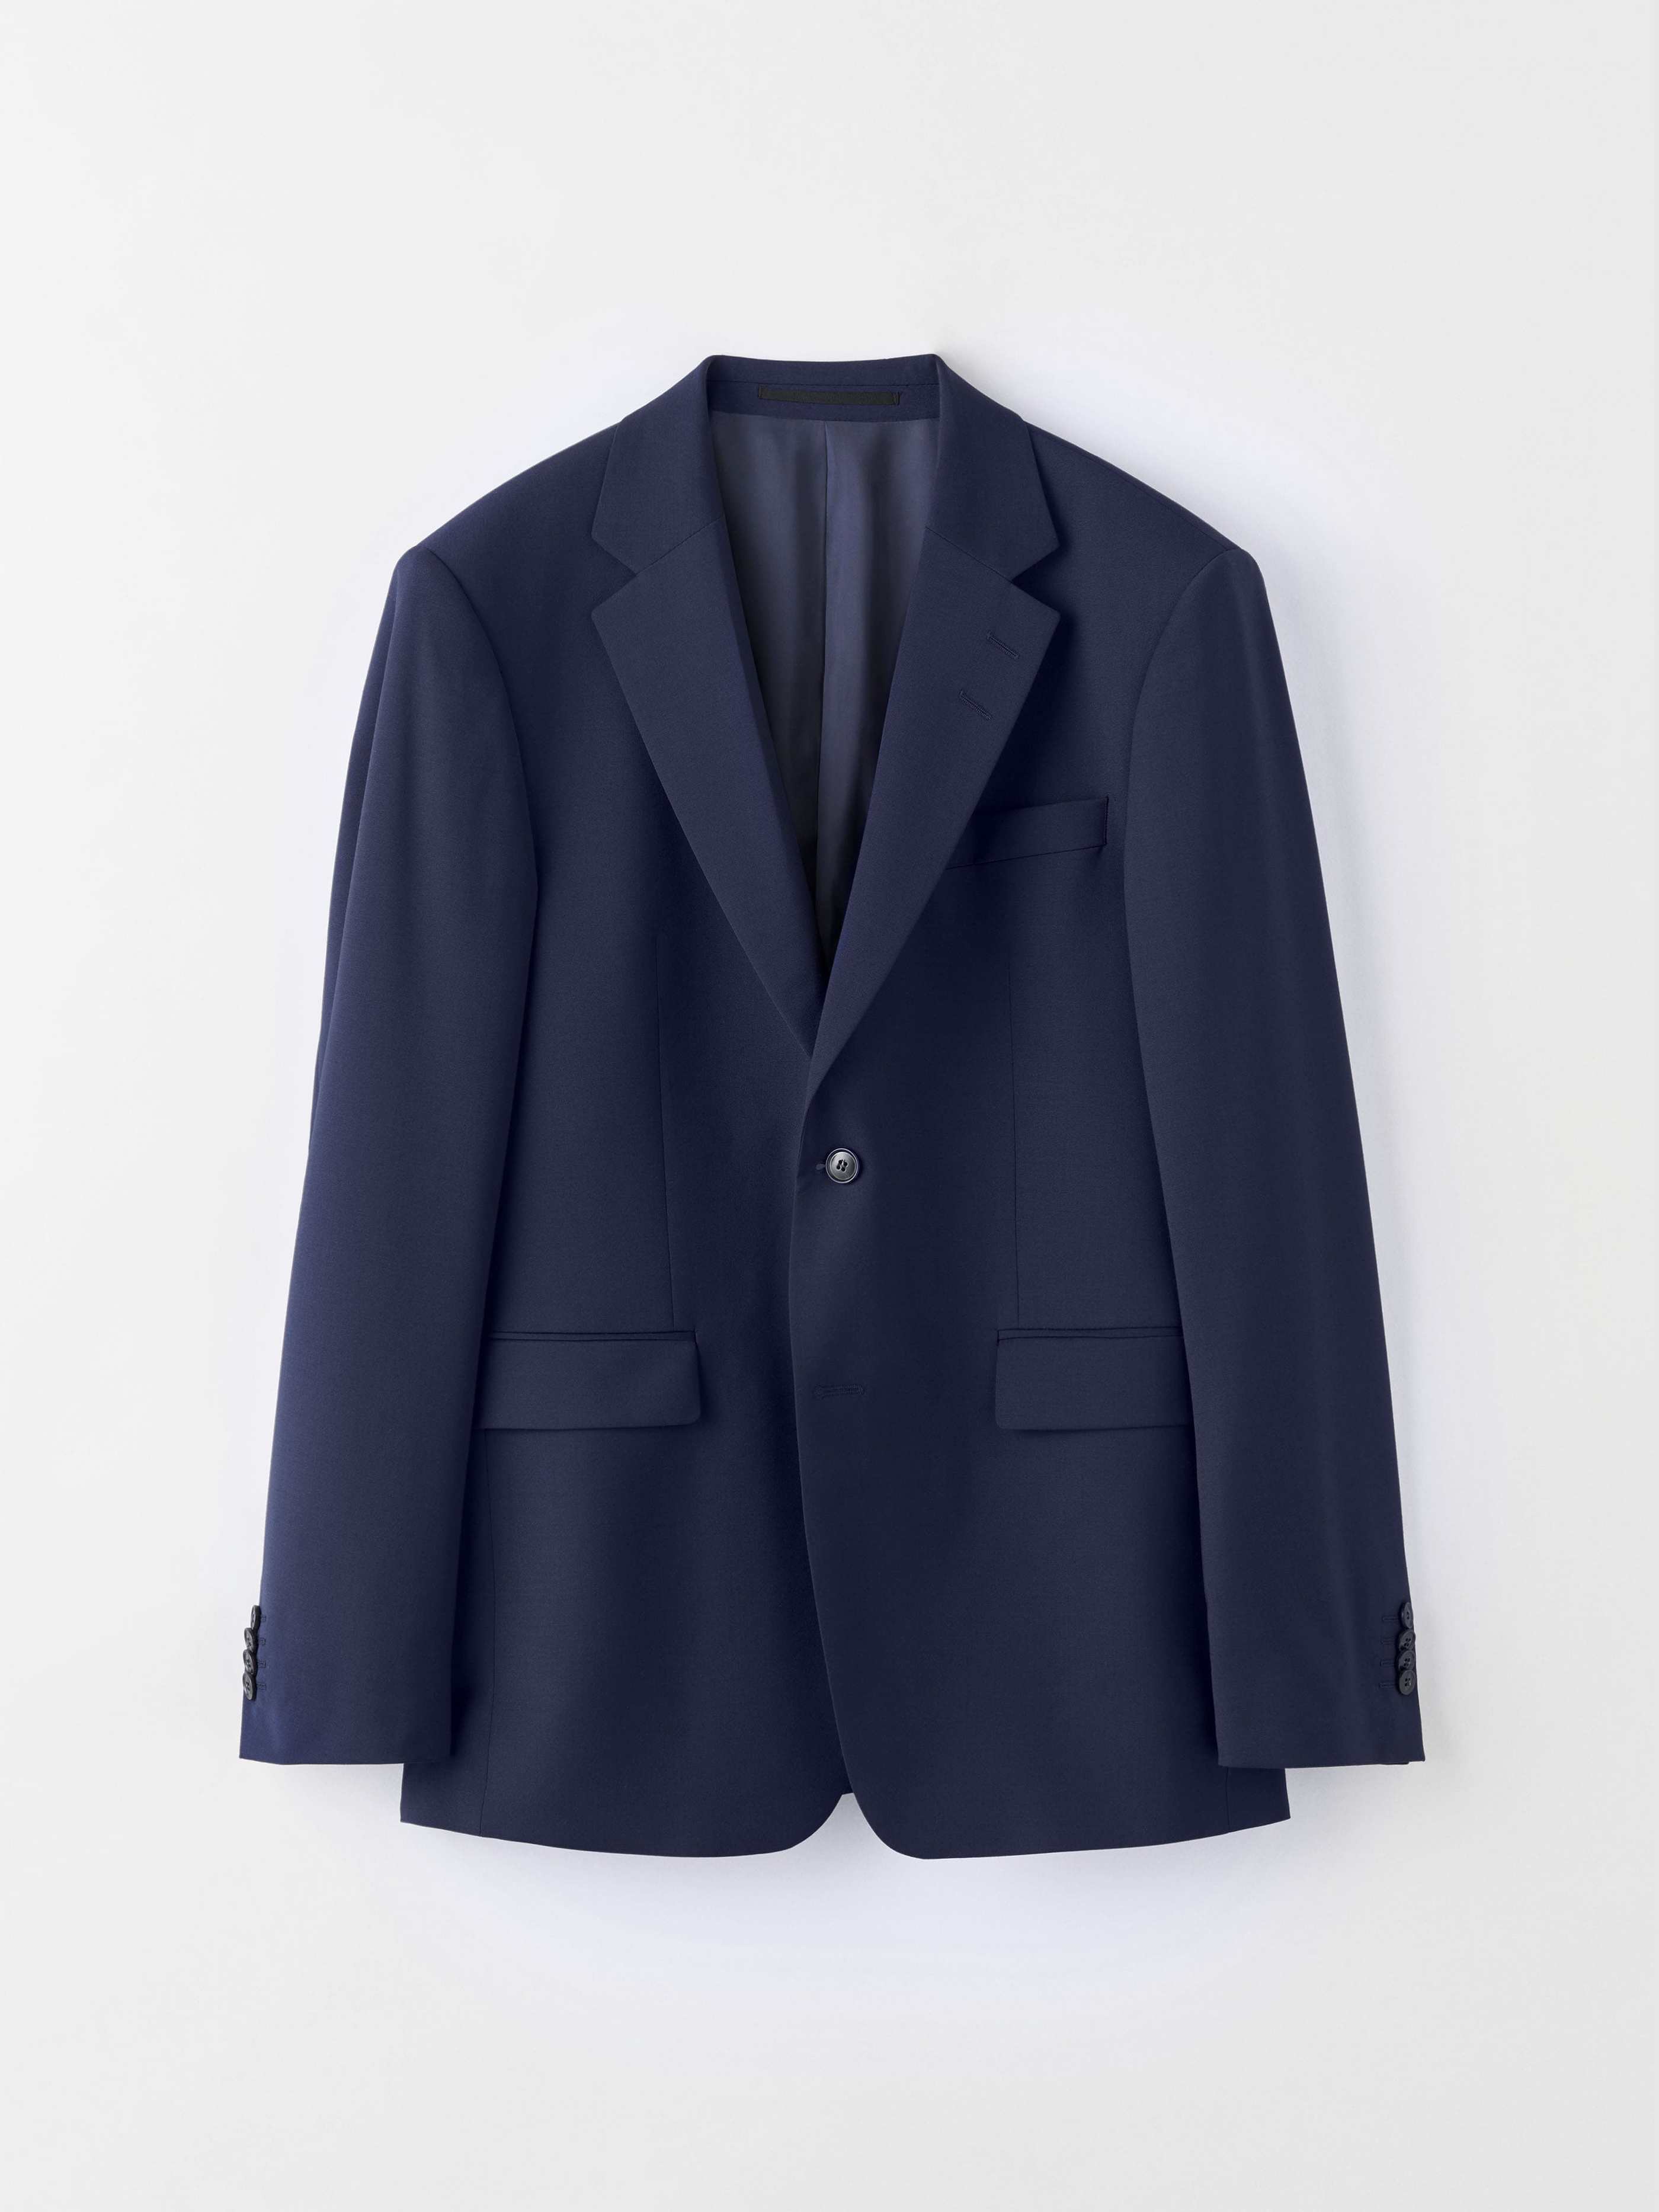 TIGER OF SWEDEN Justin Blazer in Navy T70699012Z 46 25D-ROYAL BLUE FROM EIGHTYWINGOLD - OFFICIAL BRAND PARTNER